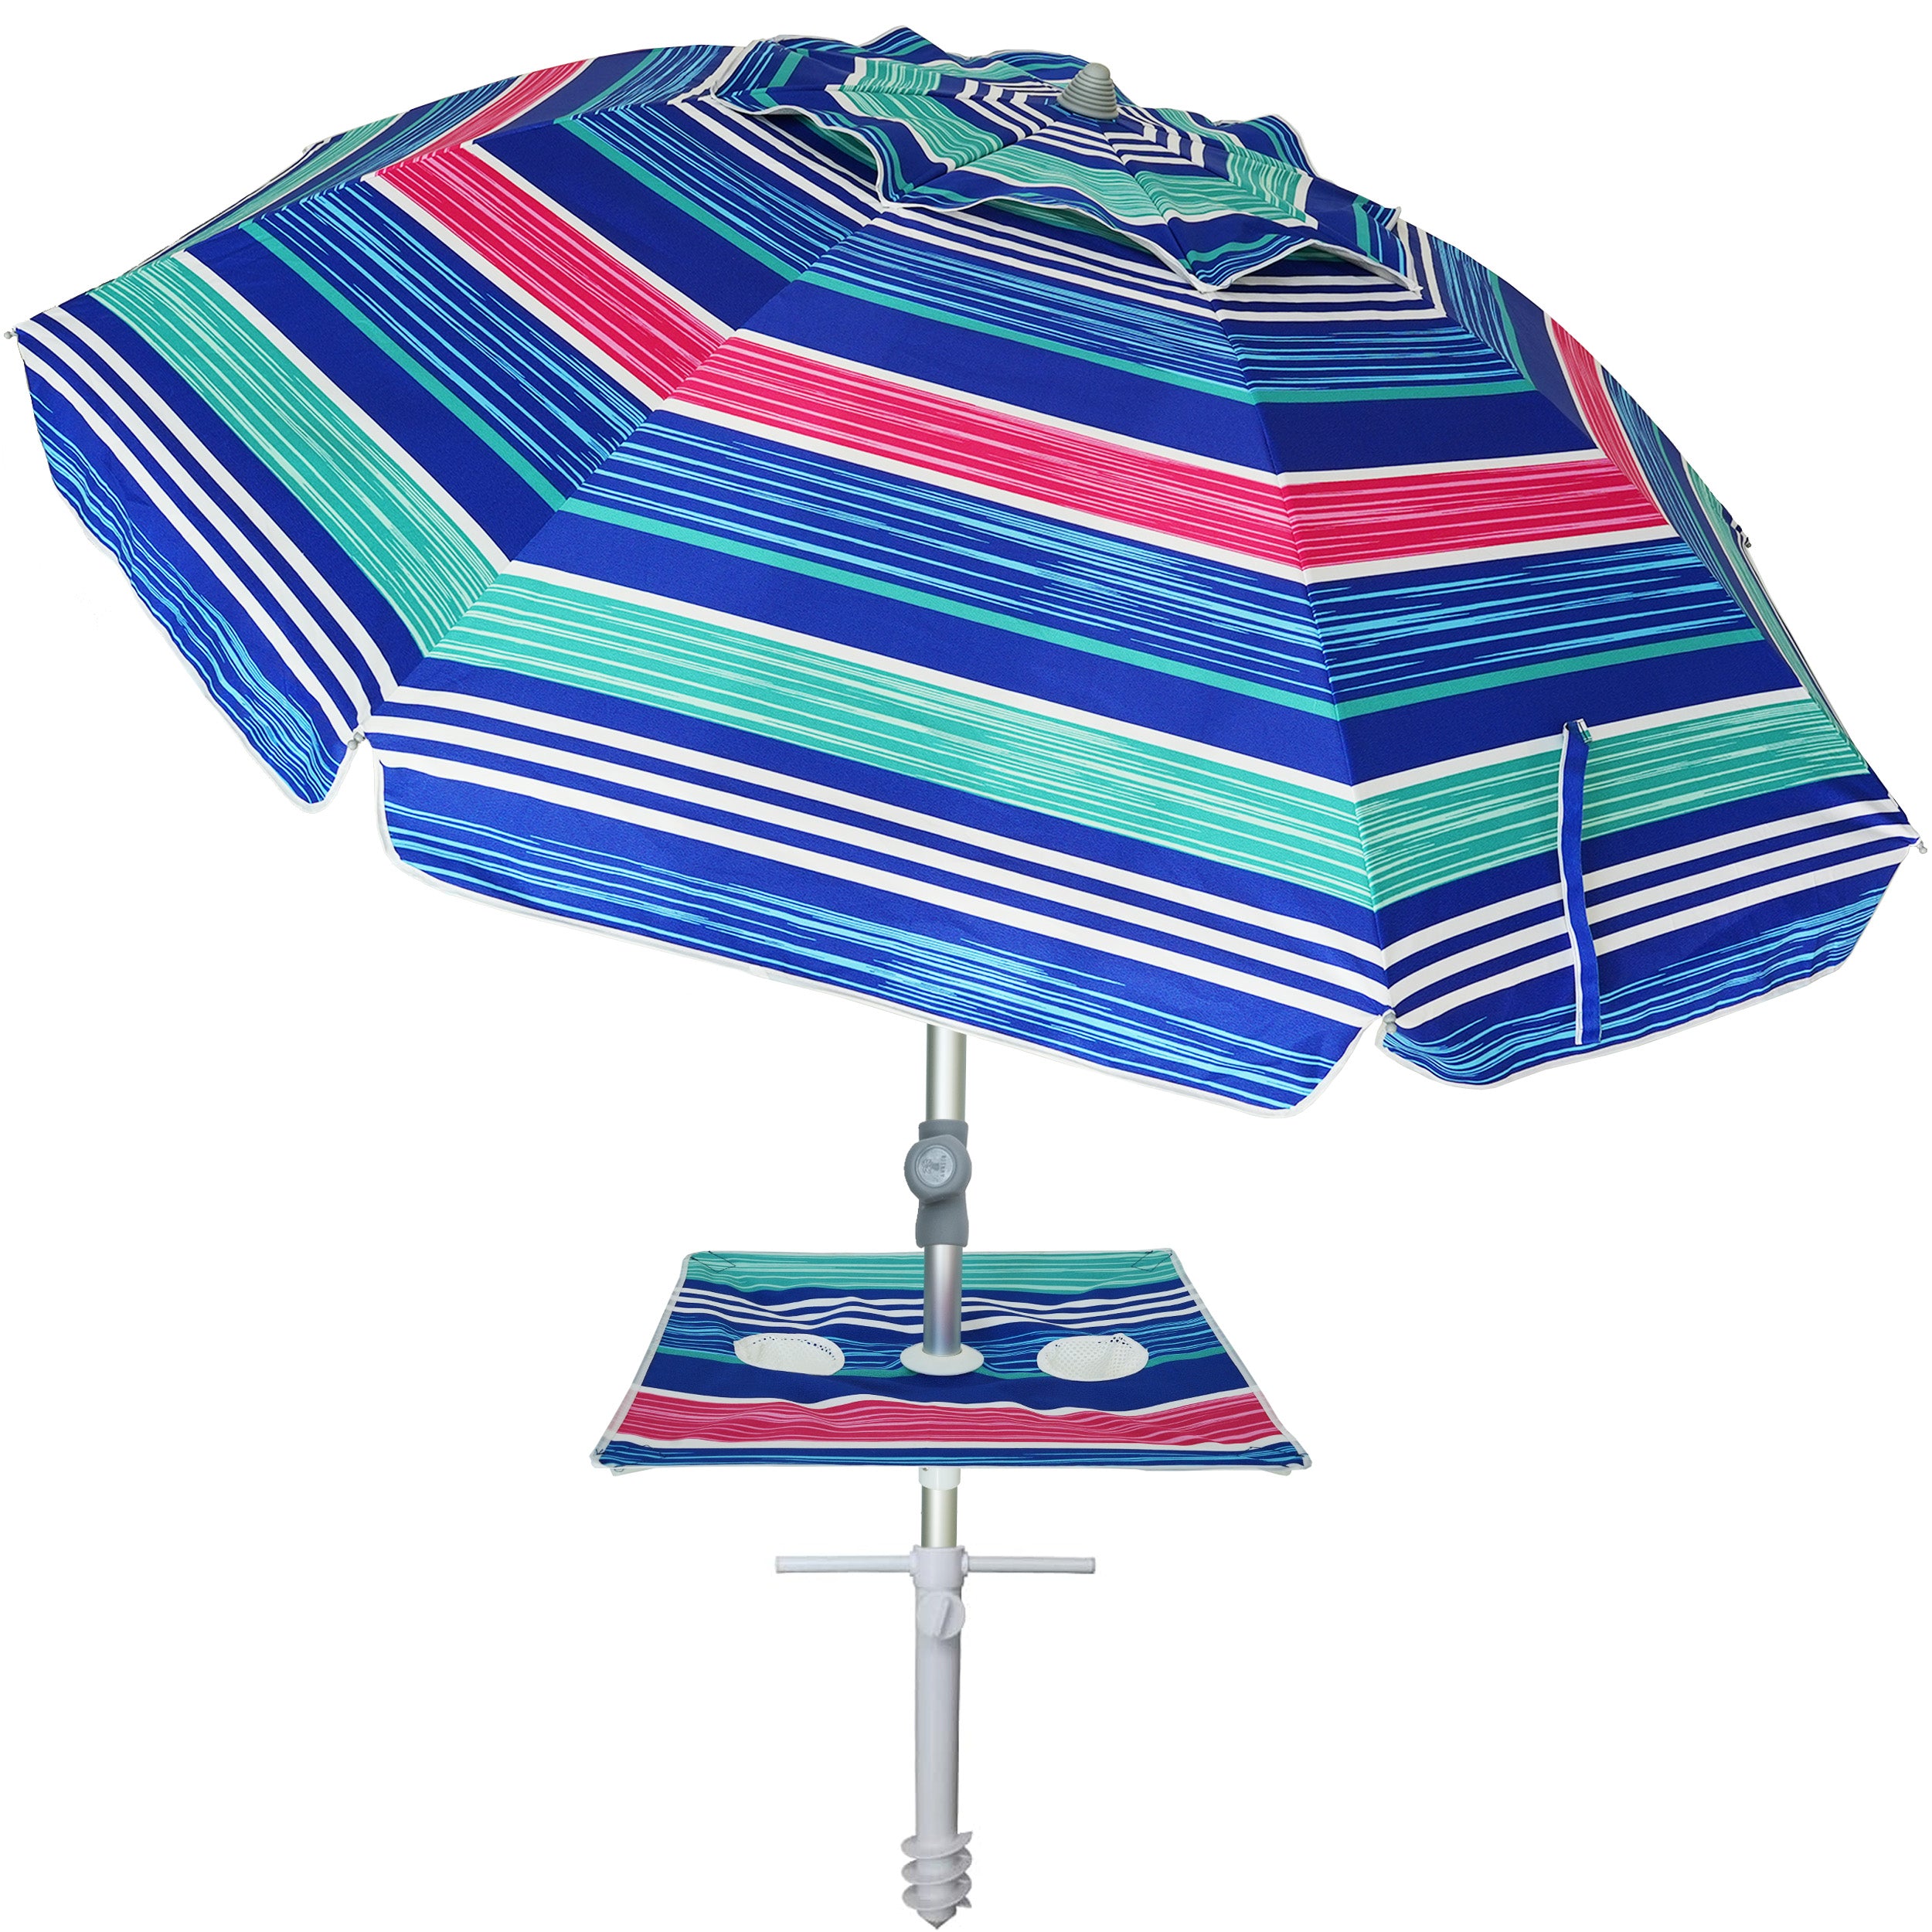 AMMSUN 7ft Beach Umbrella with sand anchor, Built-in Table Blue Red Stripes